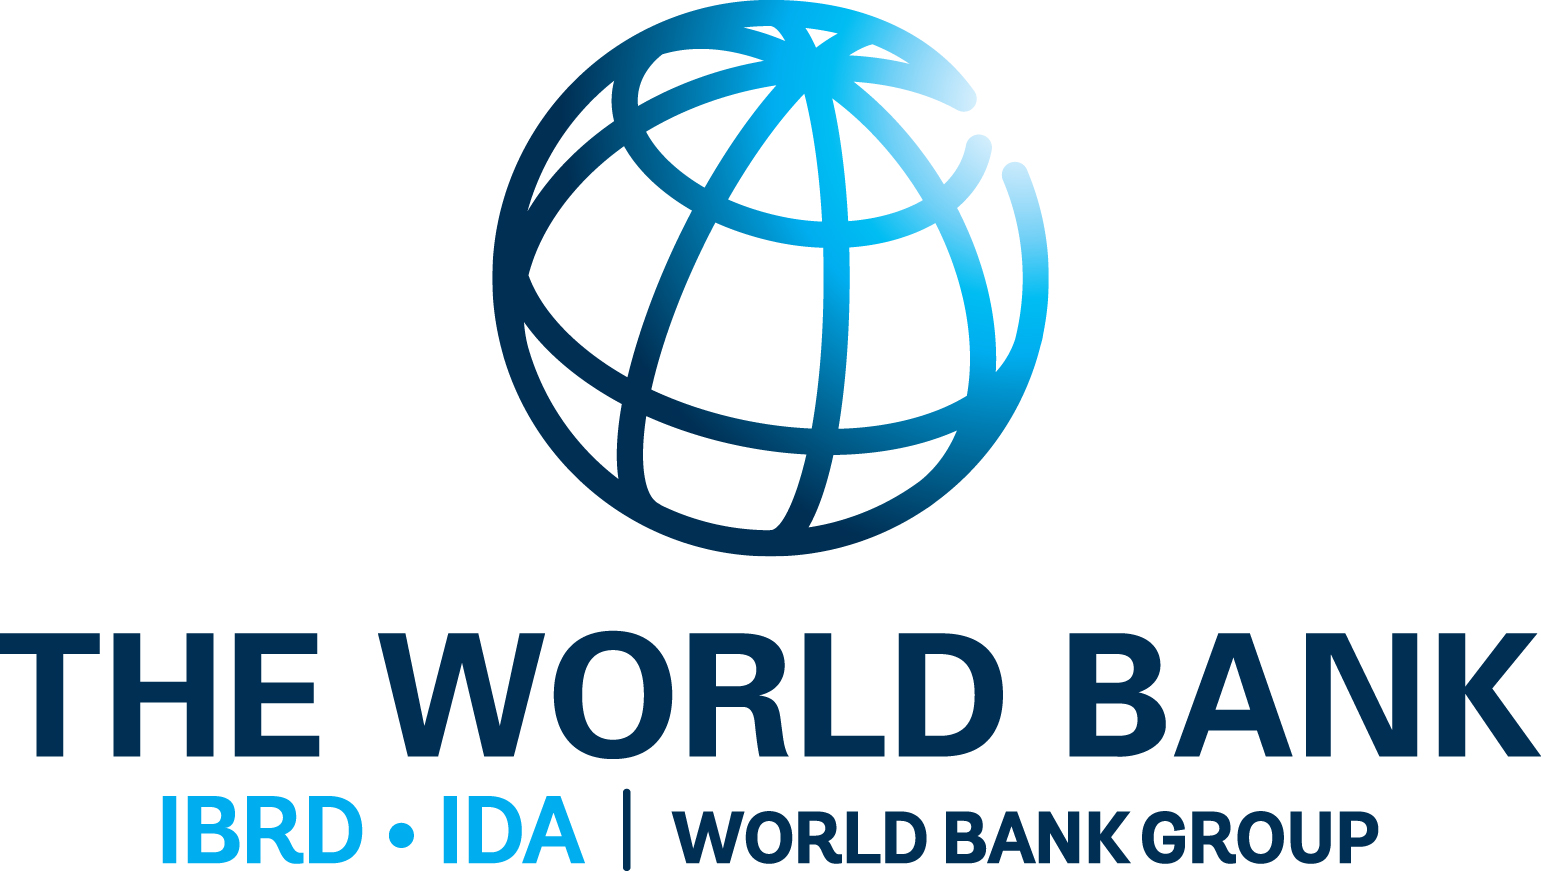 What Are The Objectives And Functions Of World Bank